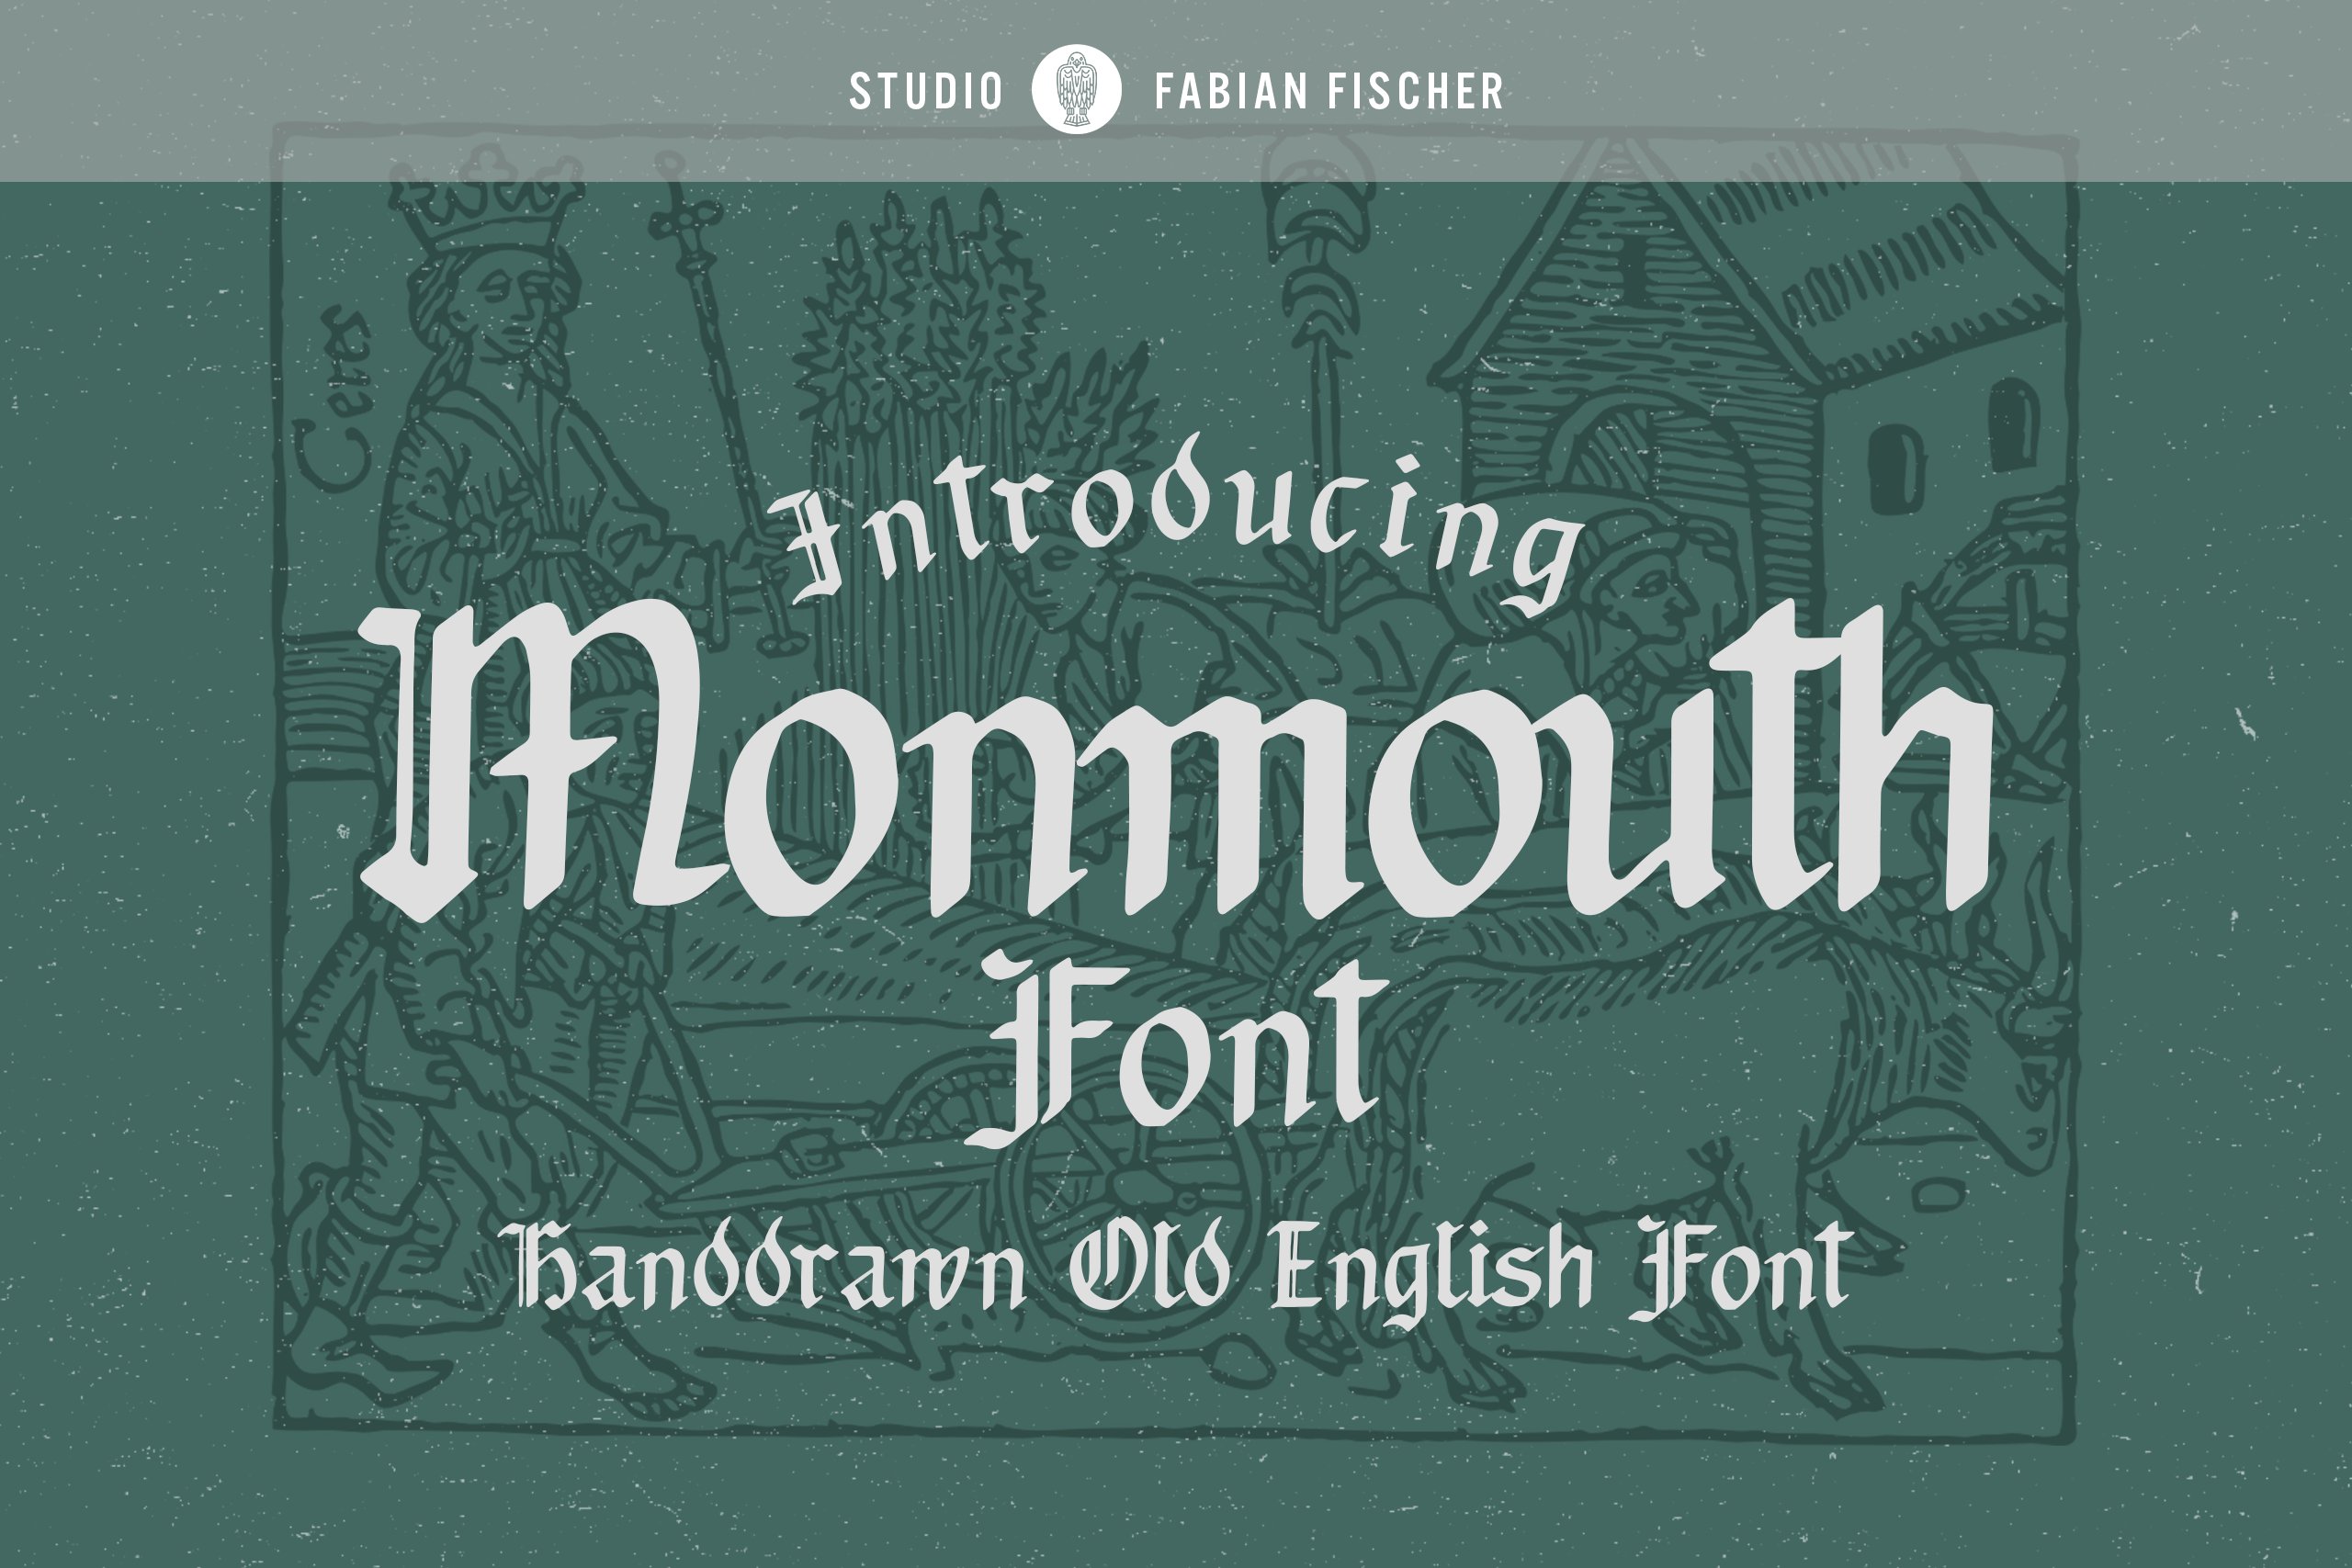 Monmouth Font - Handdrawn cover image.